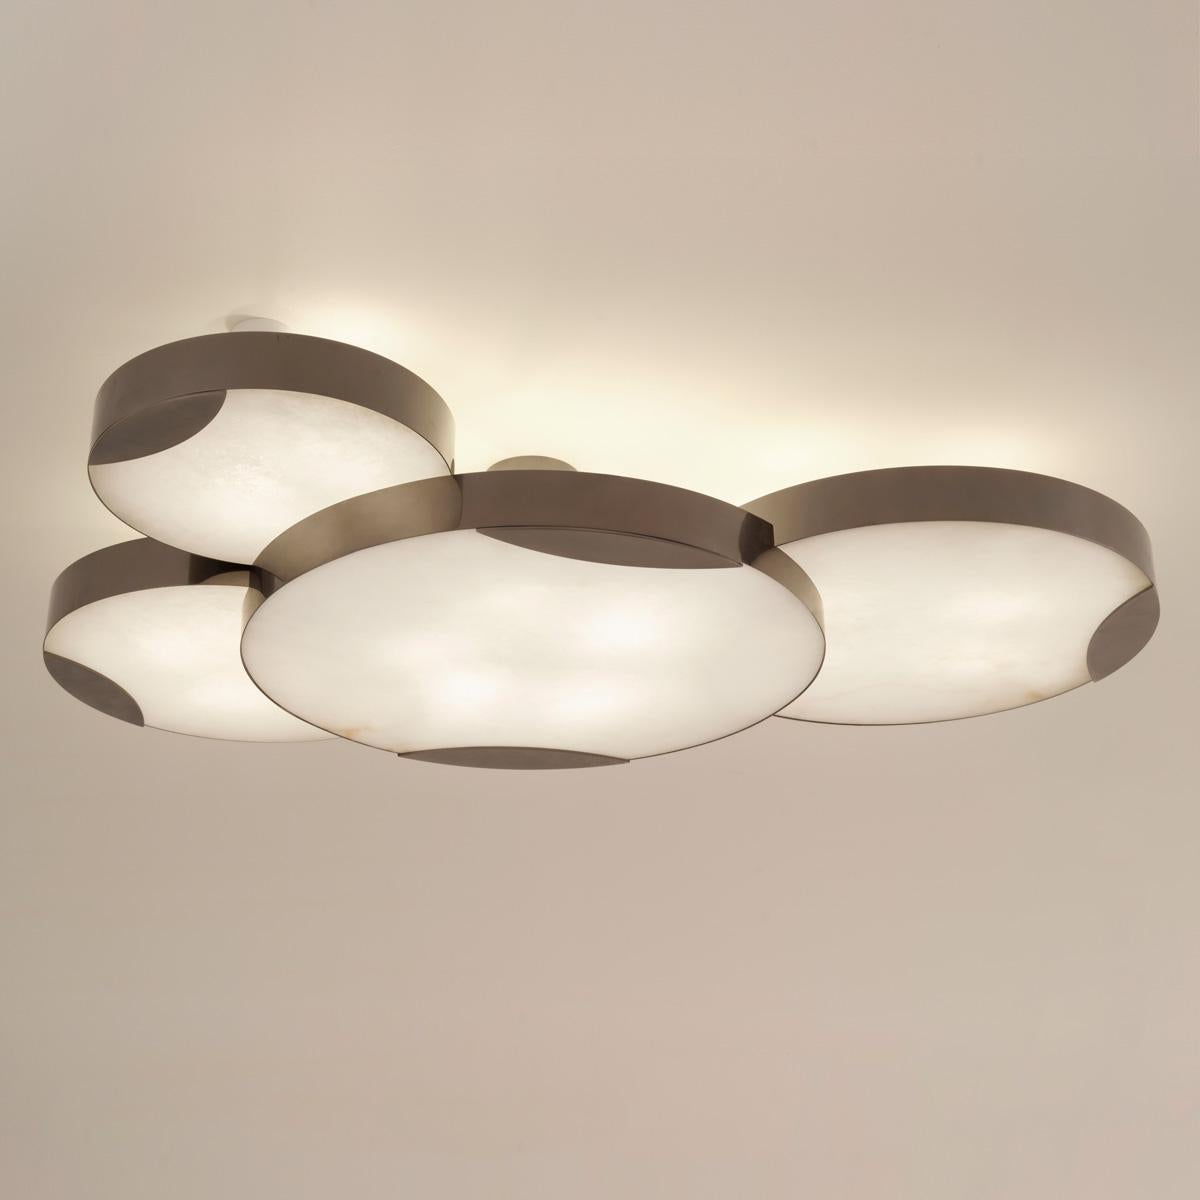 Cloud N.4 Ceiling Light by Gaspare Asaro-Bronze Finish For Sale 1